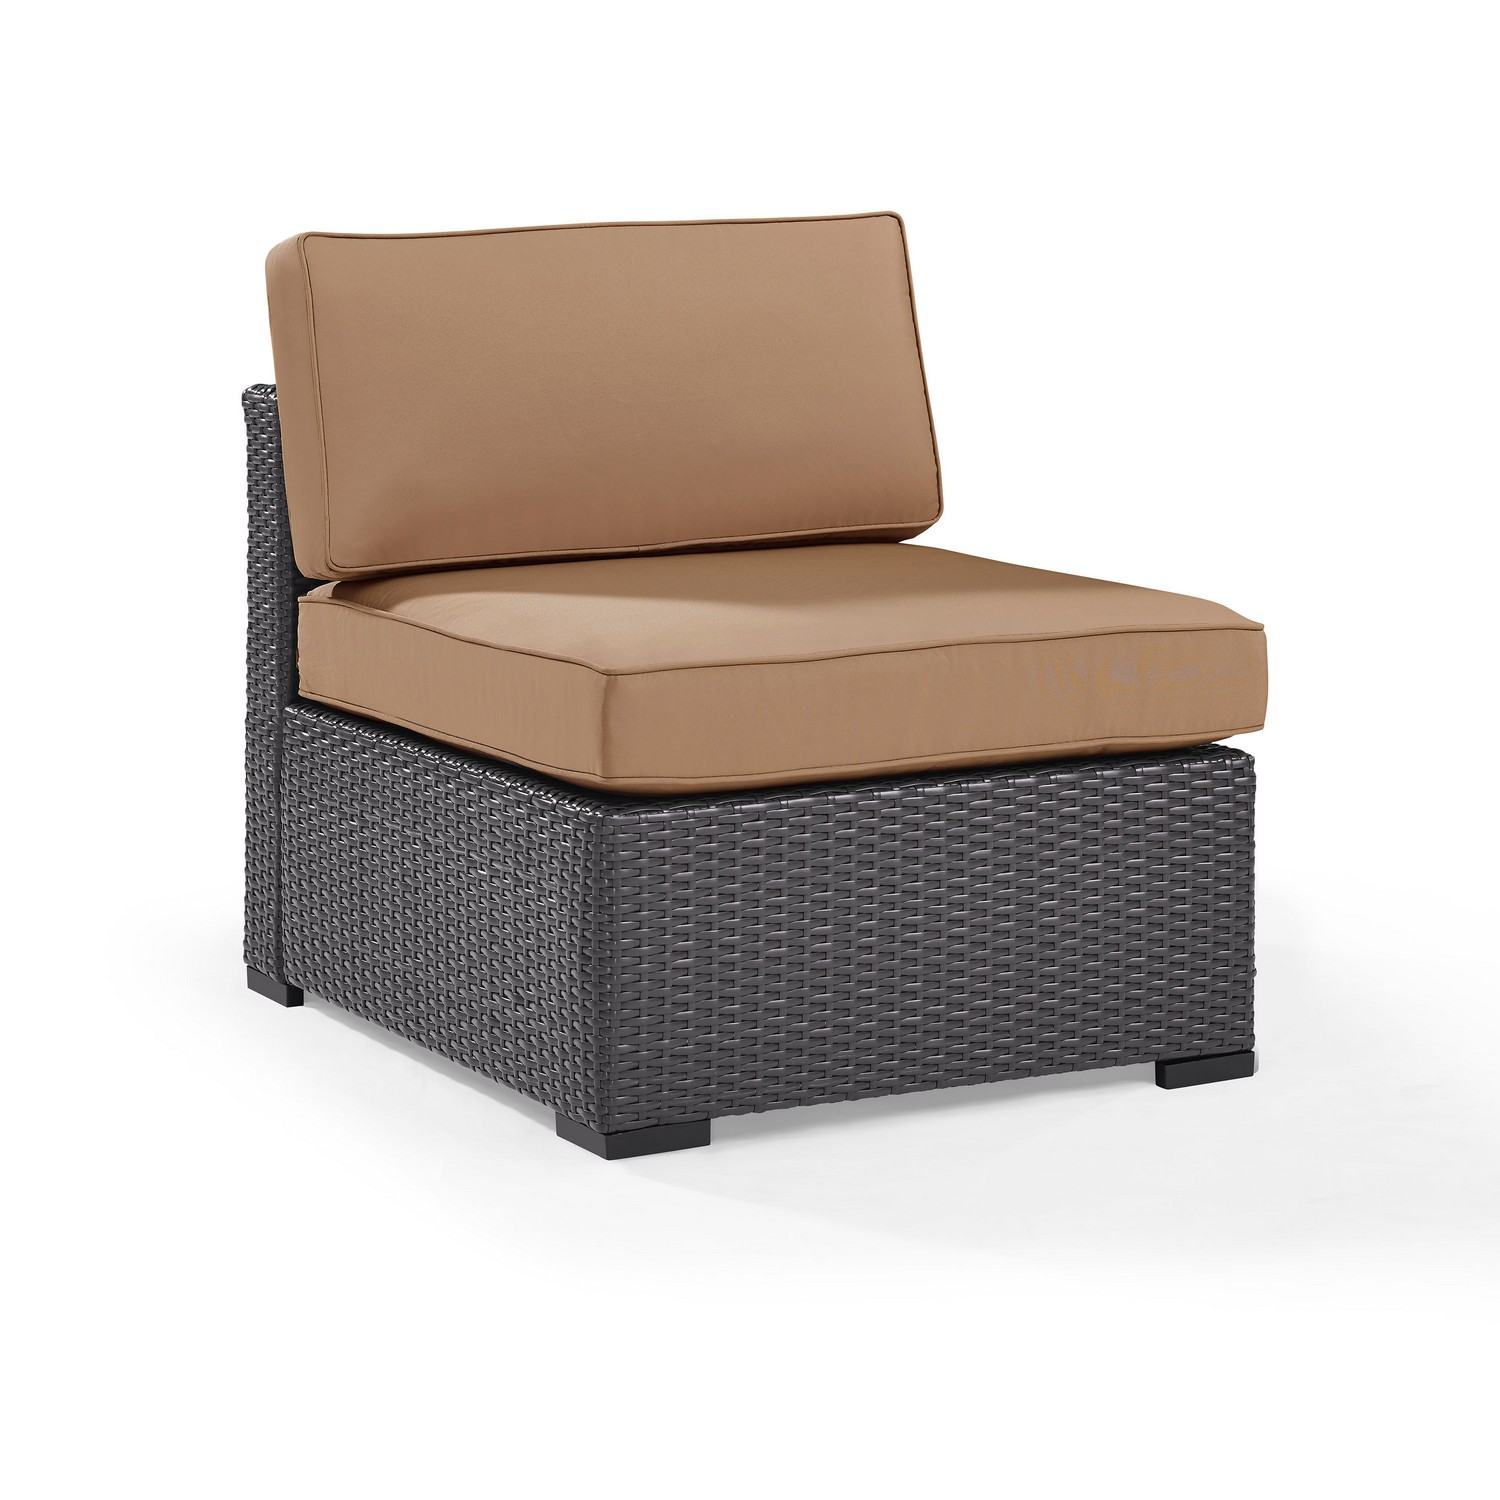 Crosley Biscayne Outdoor Wicker Armless Chair - Mocha/Brown